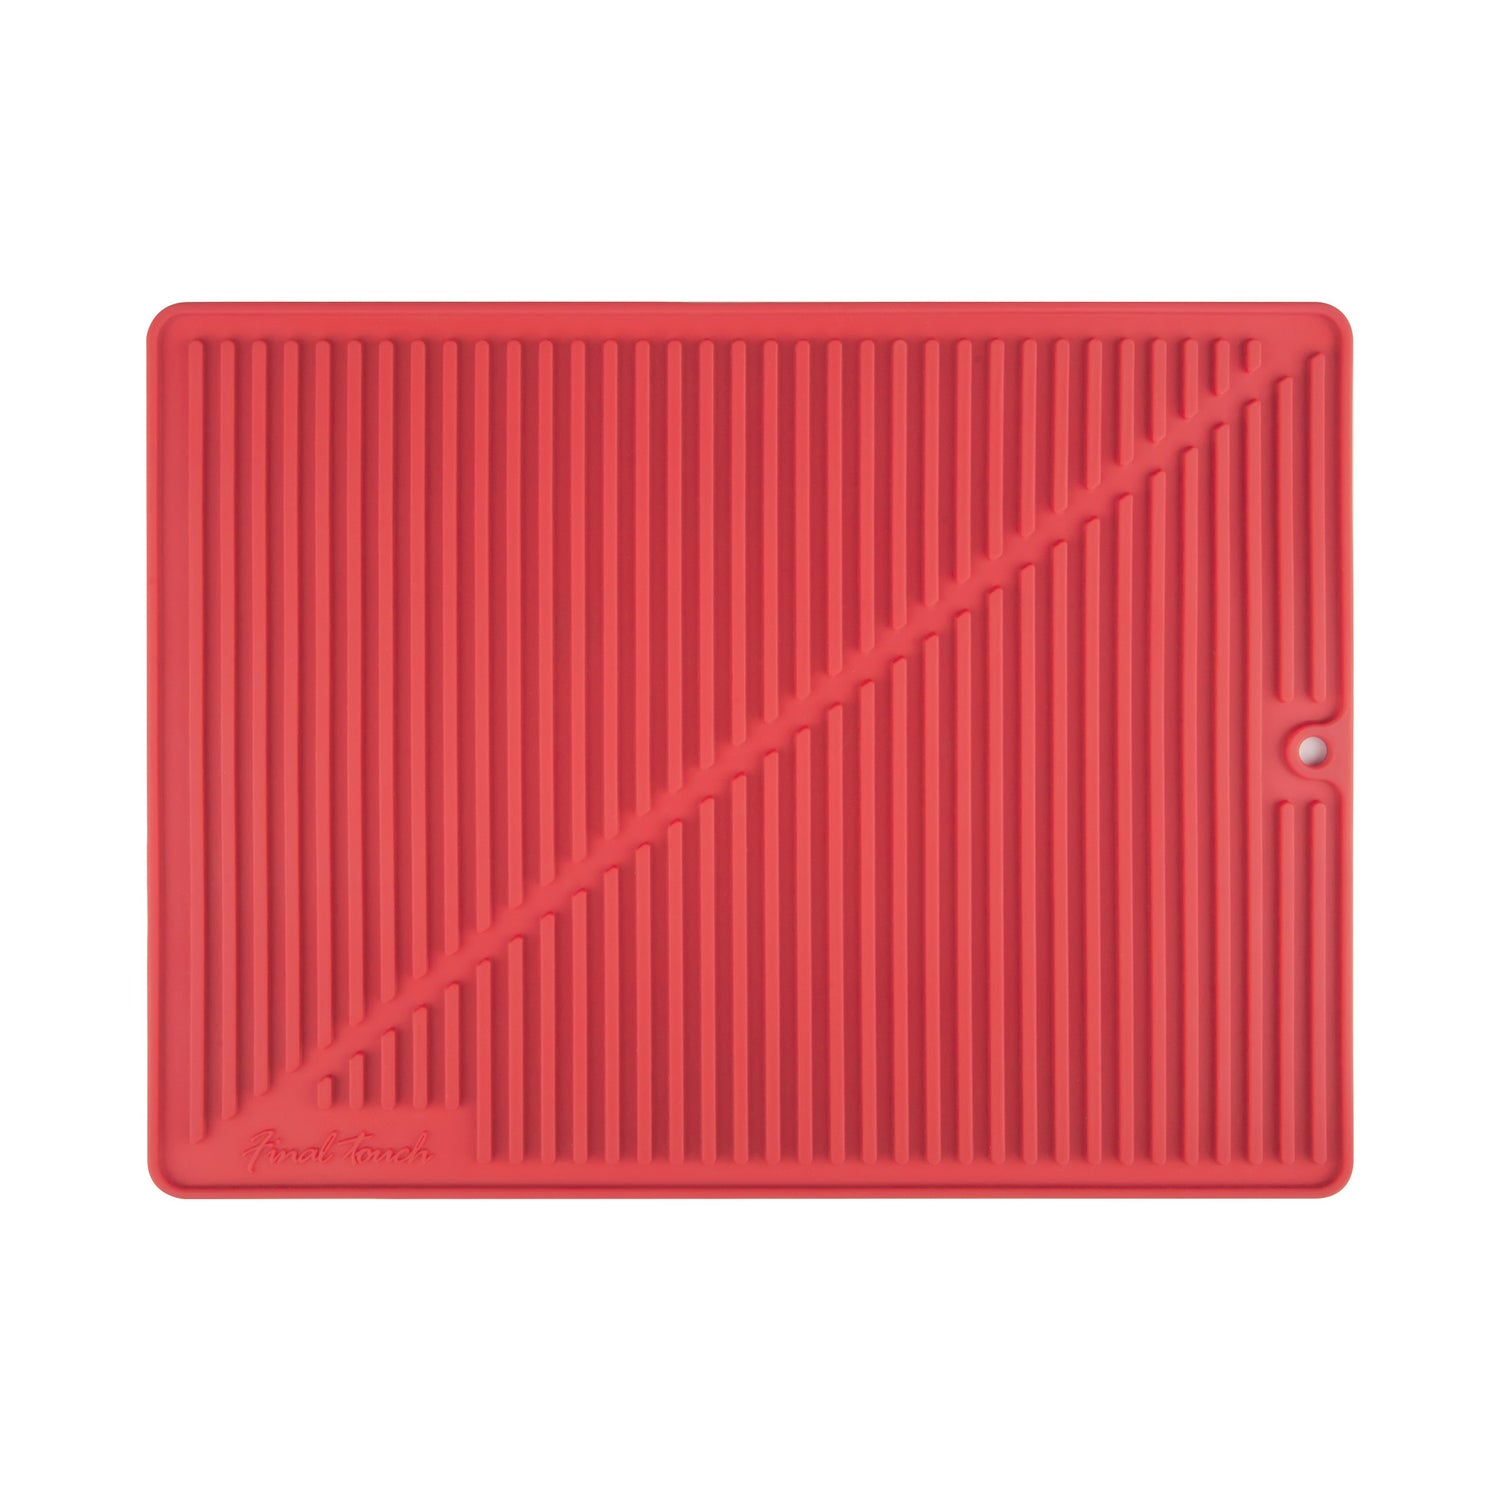 Final Touch Silicone Glass Drying Mat - Red